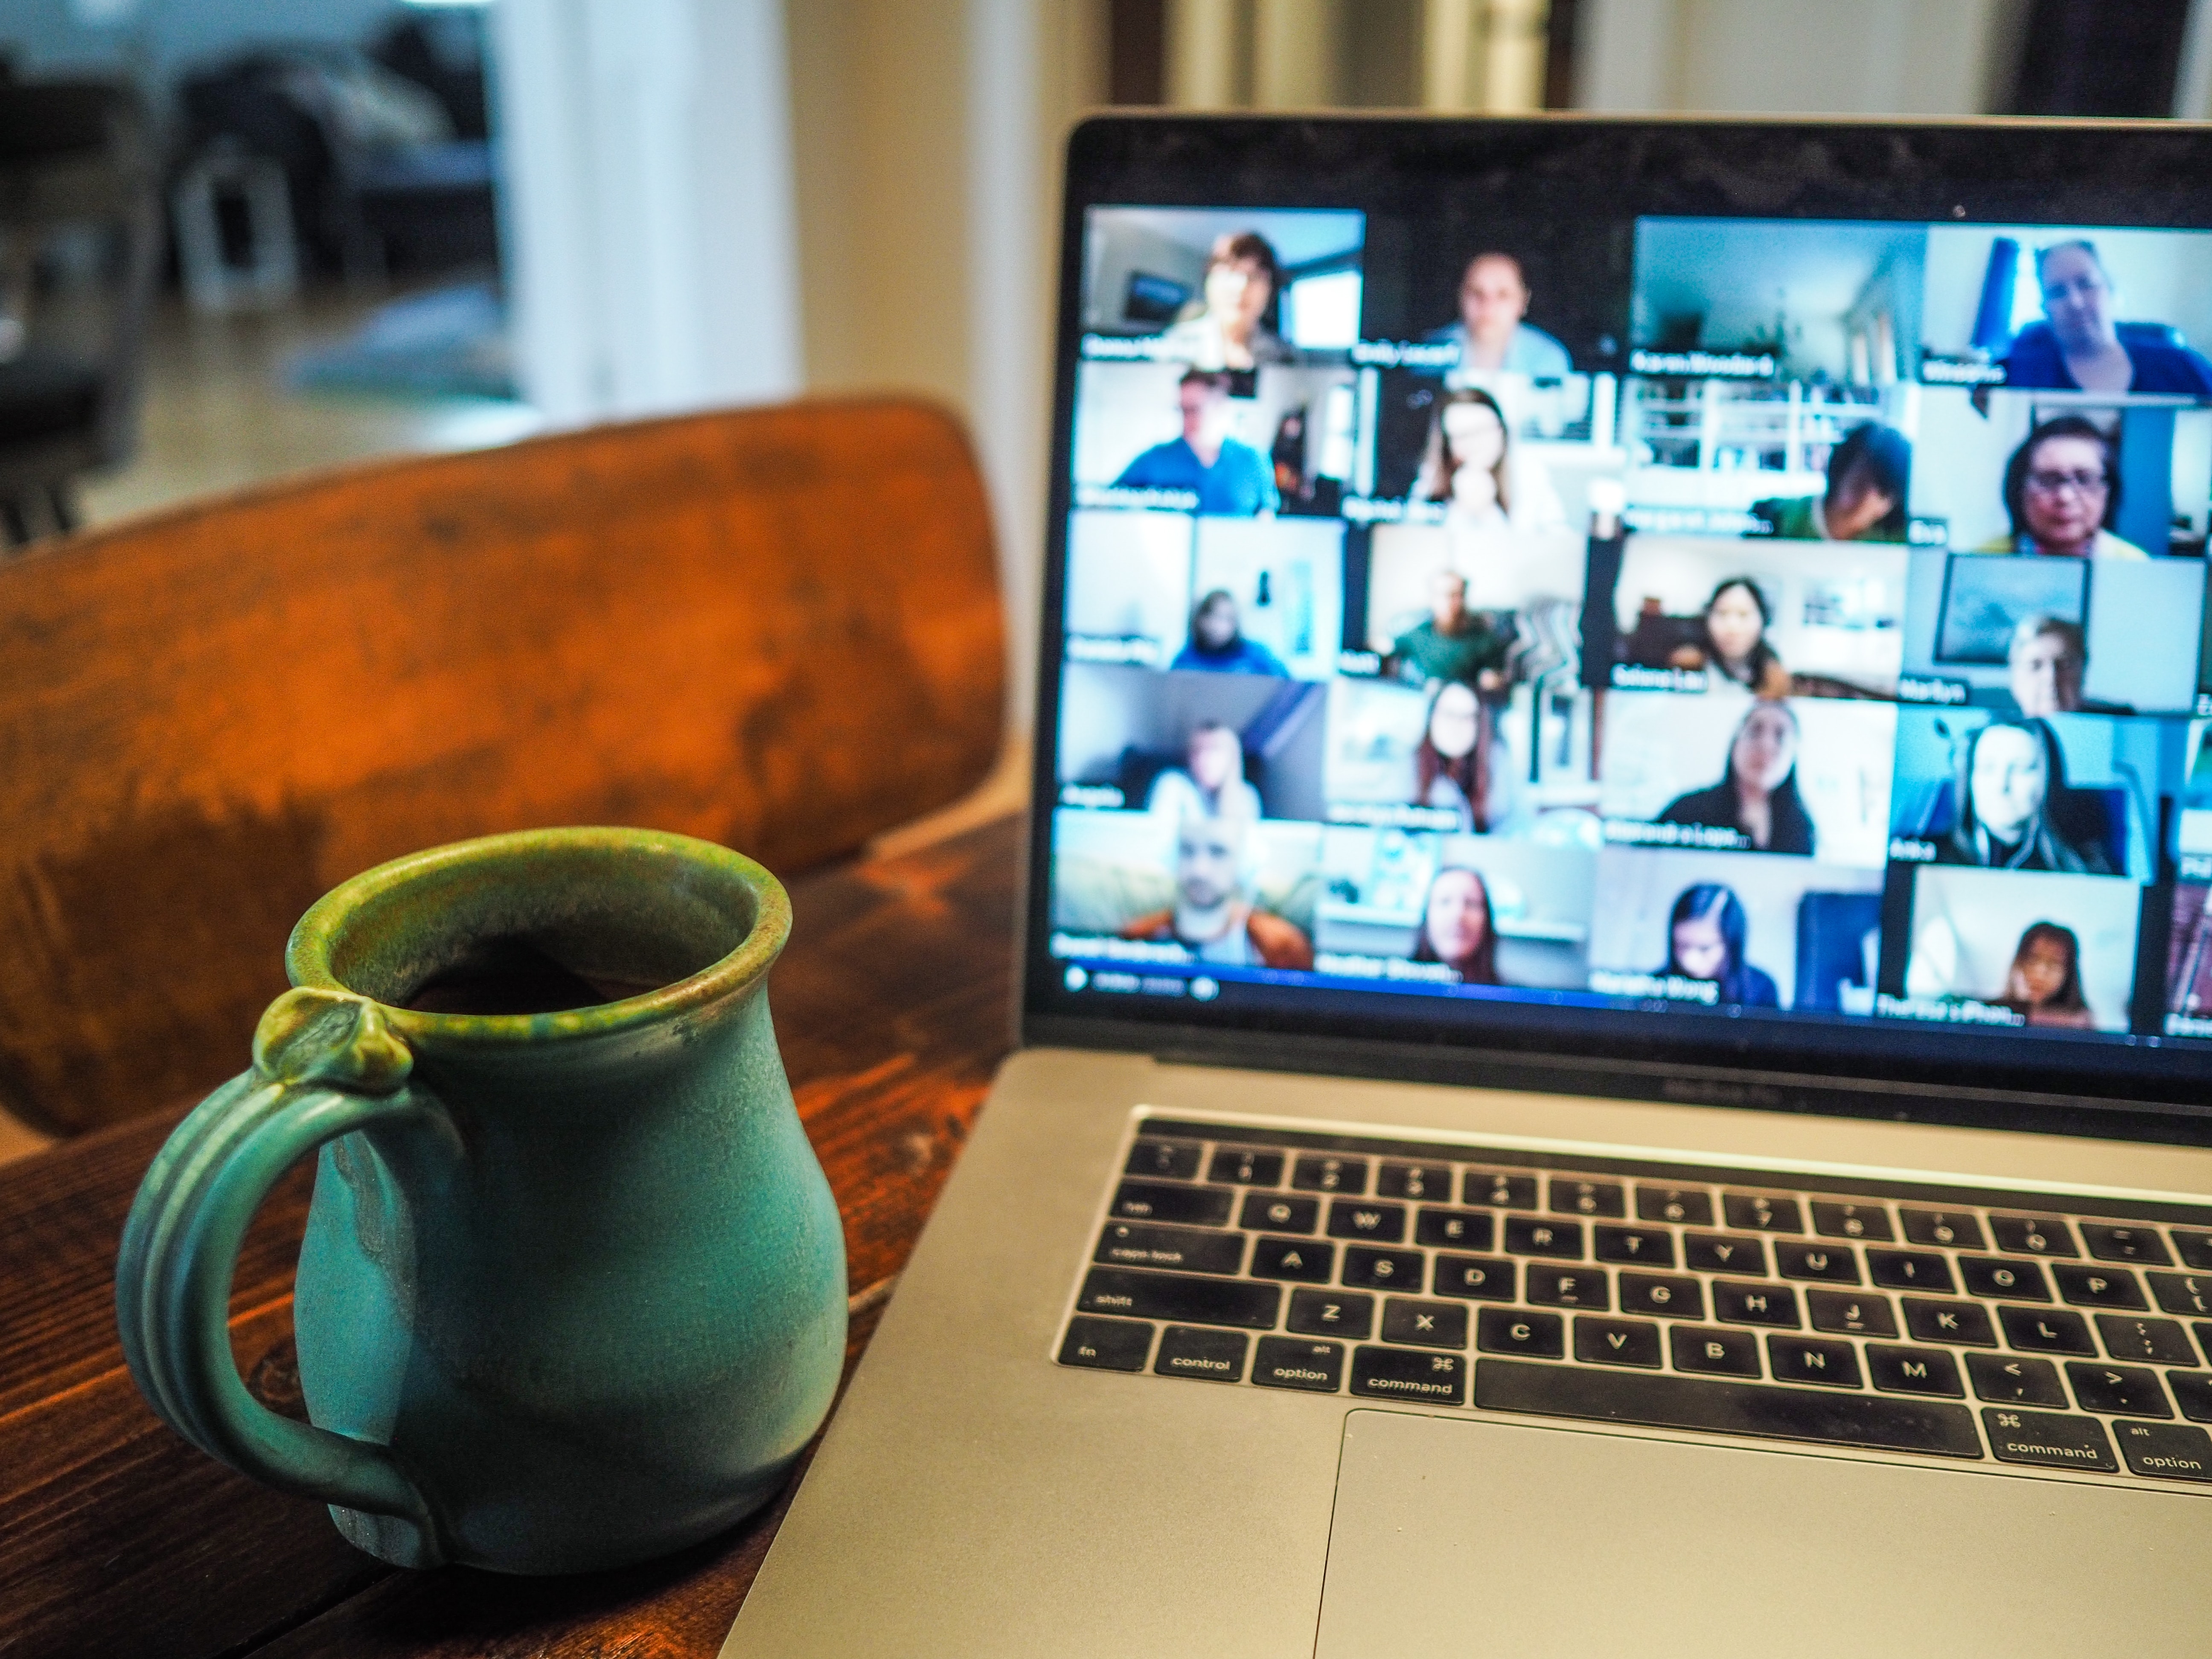 How can you promote teamwork and problem sharing in a remote team?